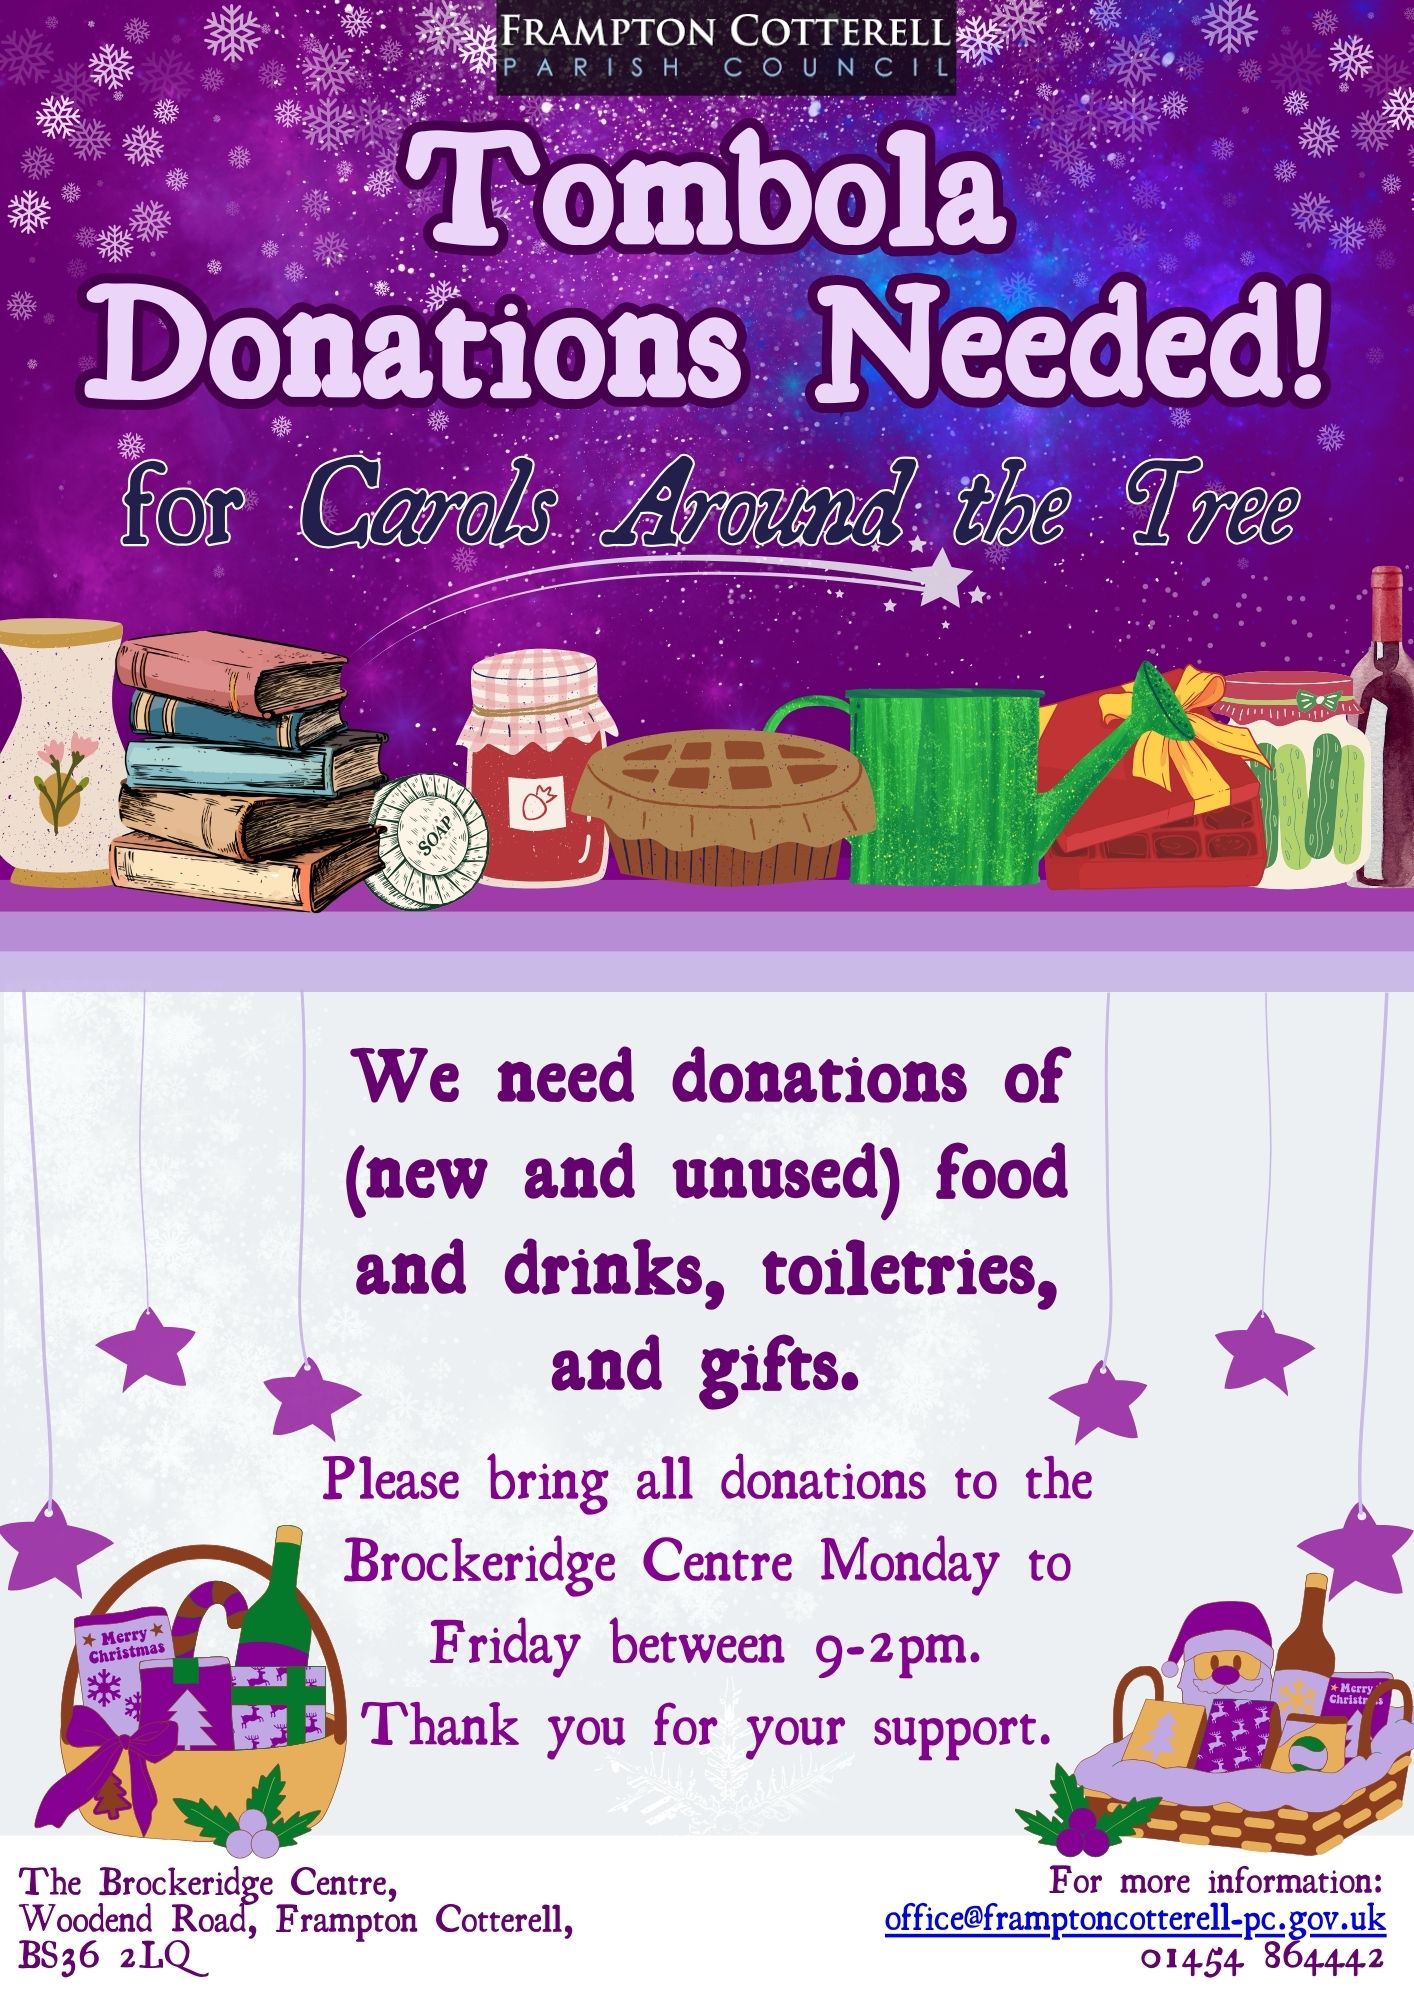 Frampton Cotterell Parish Council. Tombola Donations Needed for Carols Around The Tree. Illustrated images of jars of jam, pickles, cakes, books, wine, gift baskets etc. Lighter coloured section beneath with text reading, We need donations of (new and unused) food and drinks, toiletries, and gifts. Please bring all donations to the Brockeridge Centre Monday to Friday between 9-2pm. Thank you for your support. The Brockeridge Centre, Woodend Road, Frampton Cotterell, BS36 2LQ. For more information: office@framptoncotterell-pc.gov.uk 01454 864442